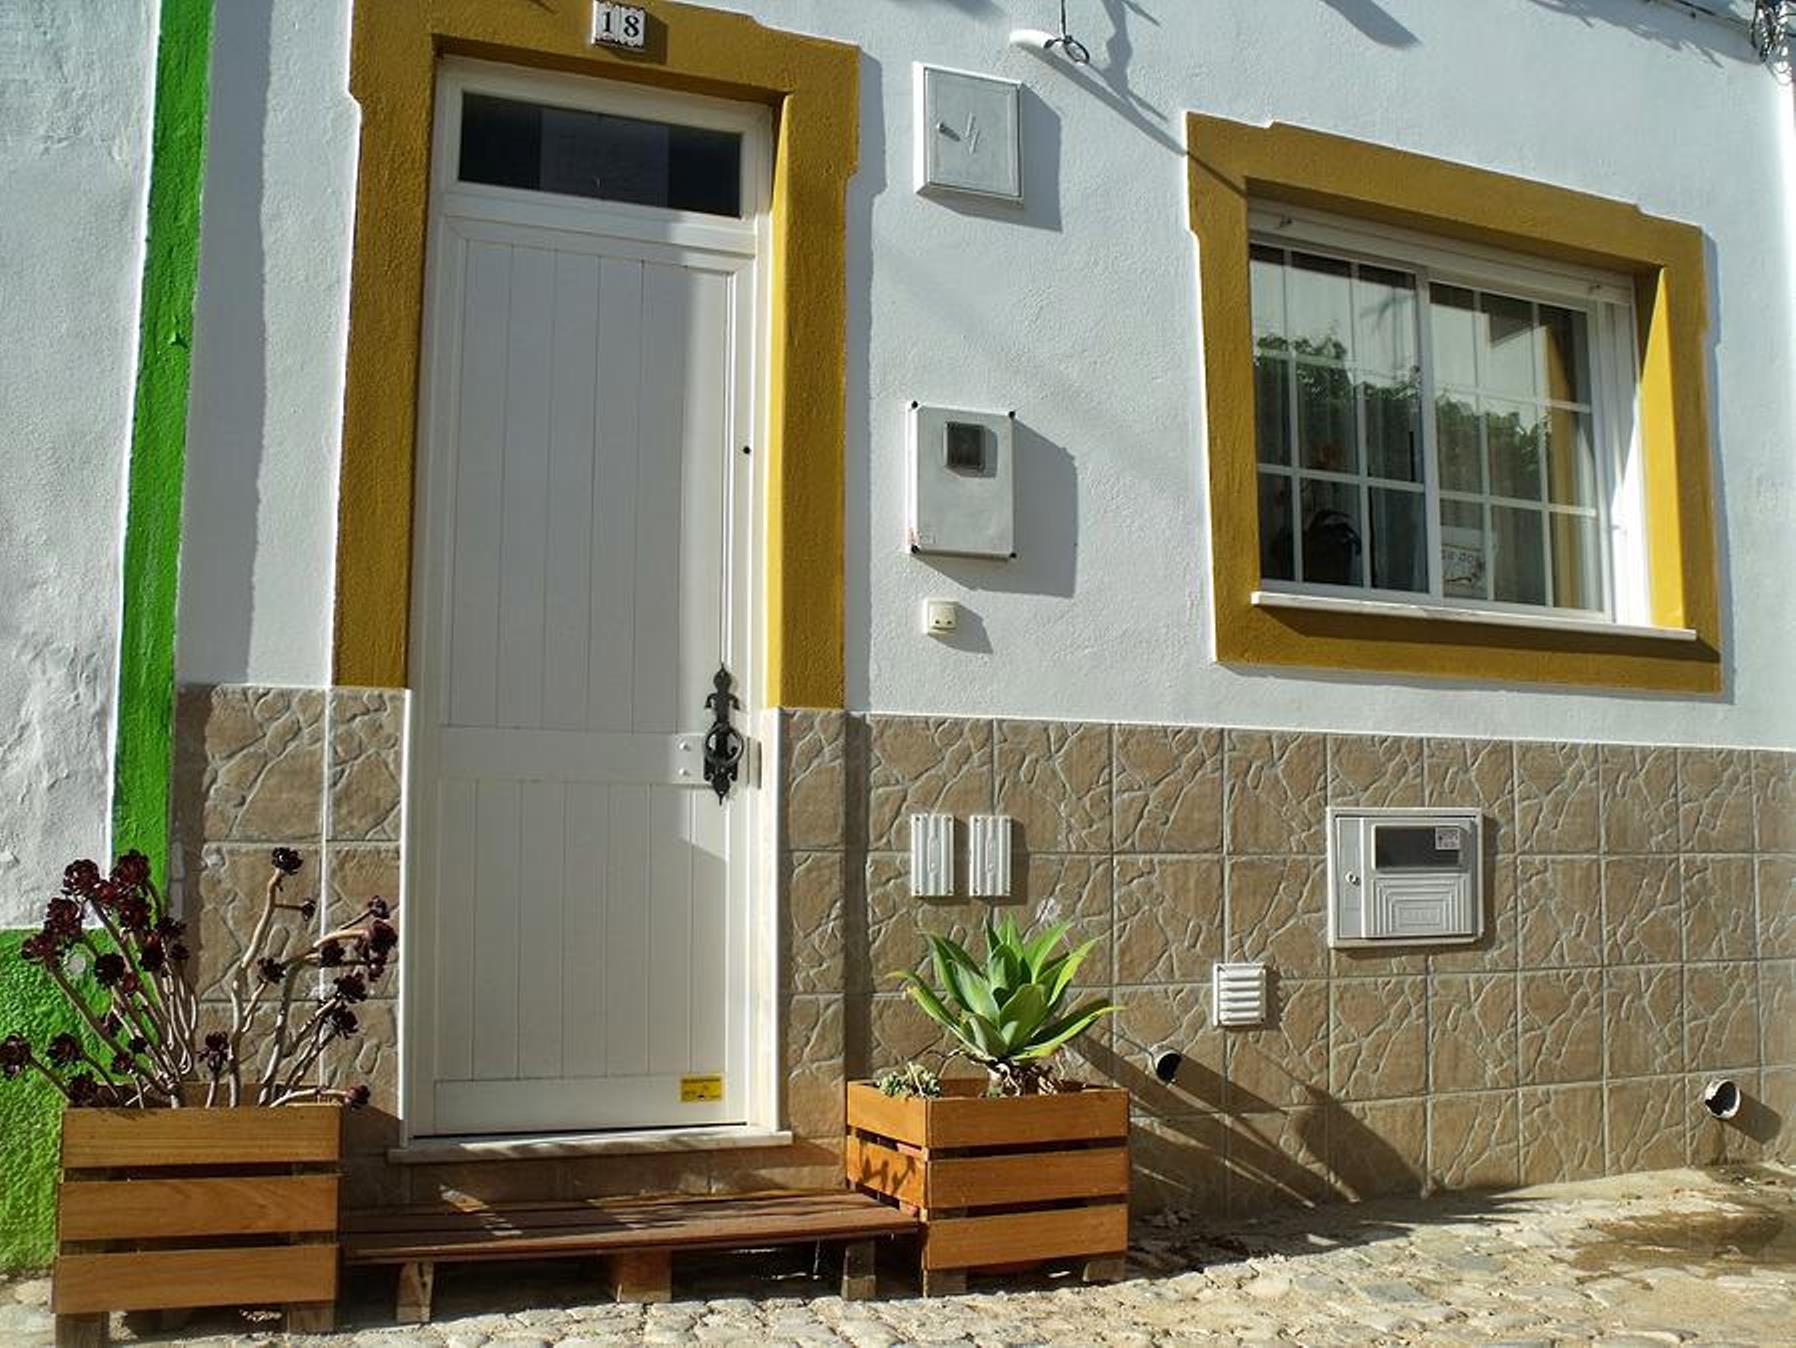 2 bedroom cottage in heart of charming village to rent